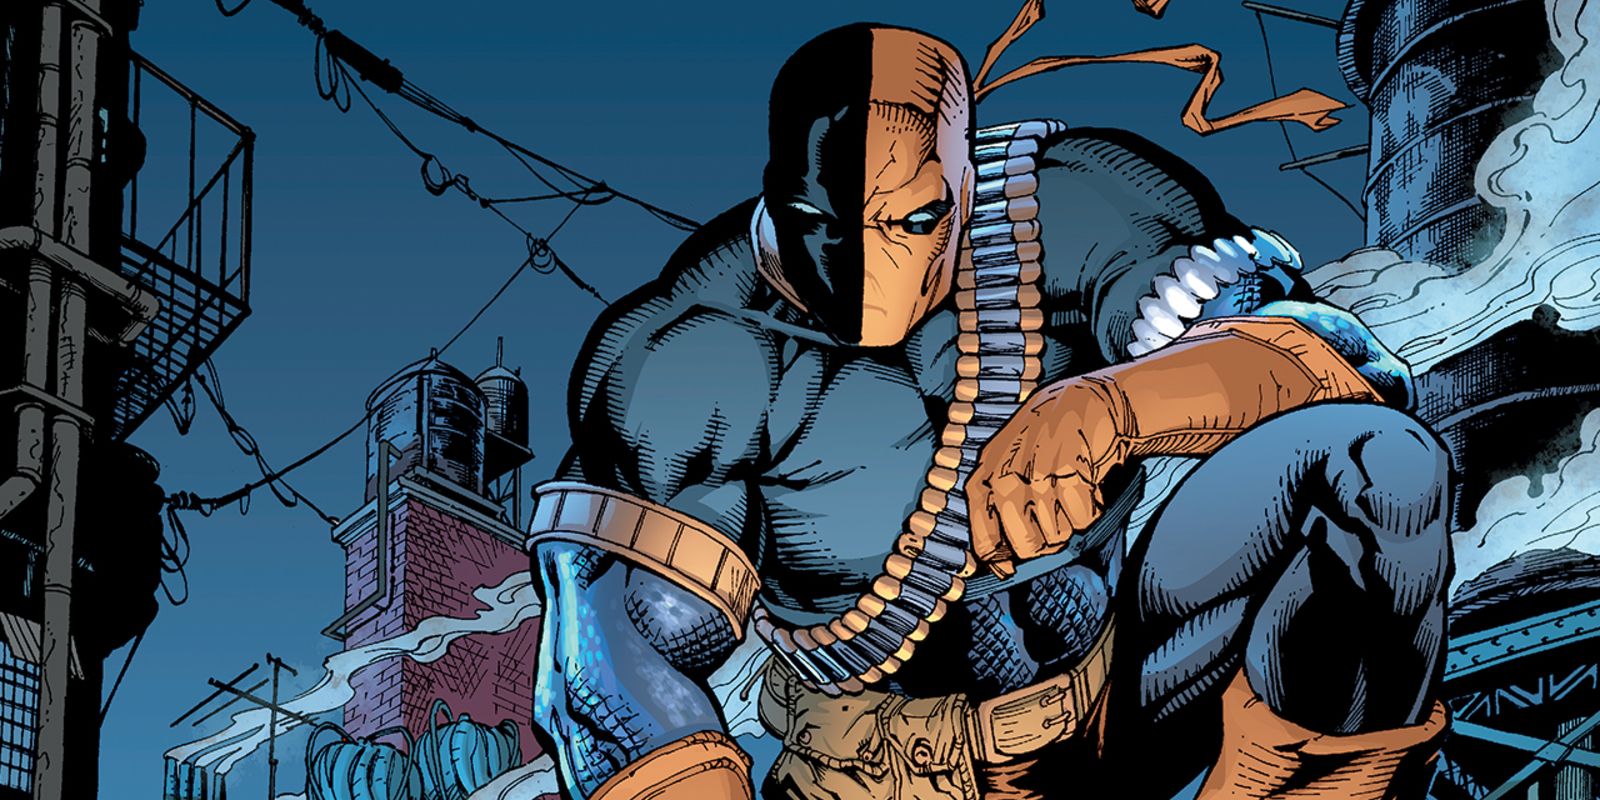 Deathstroke perched on a rooftop in DC Comics